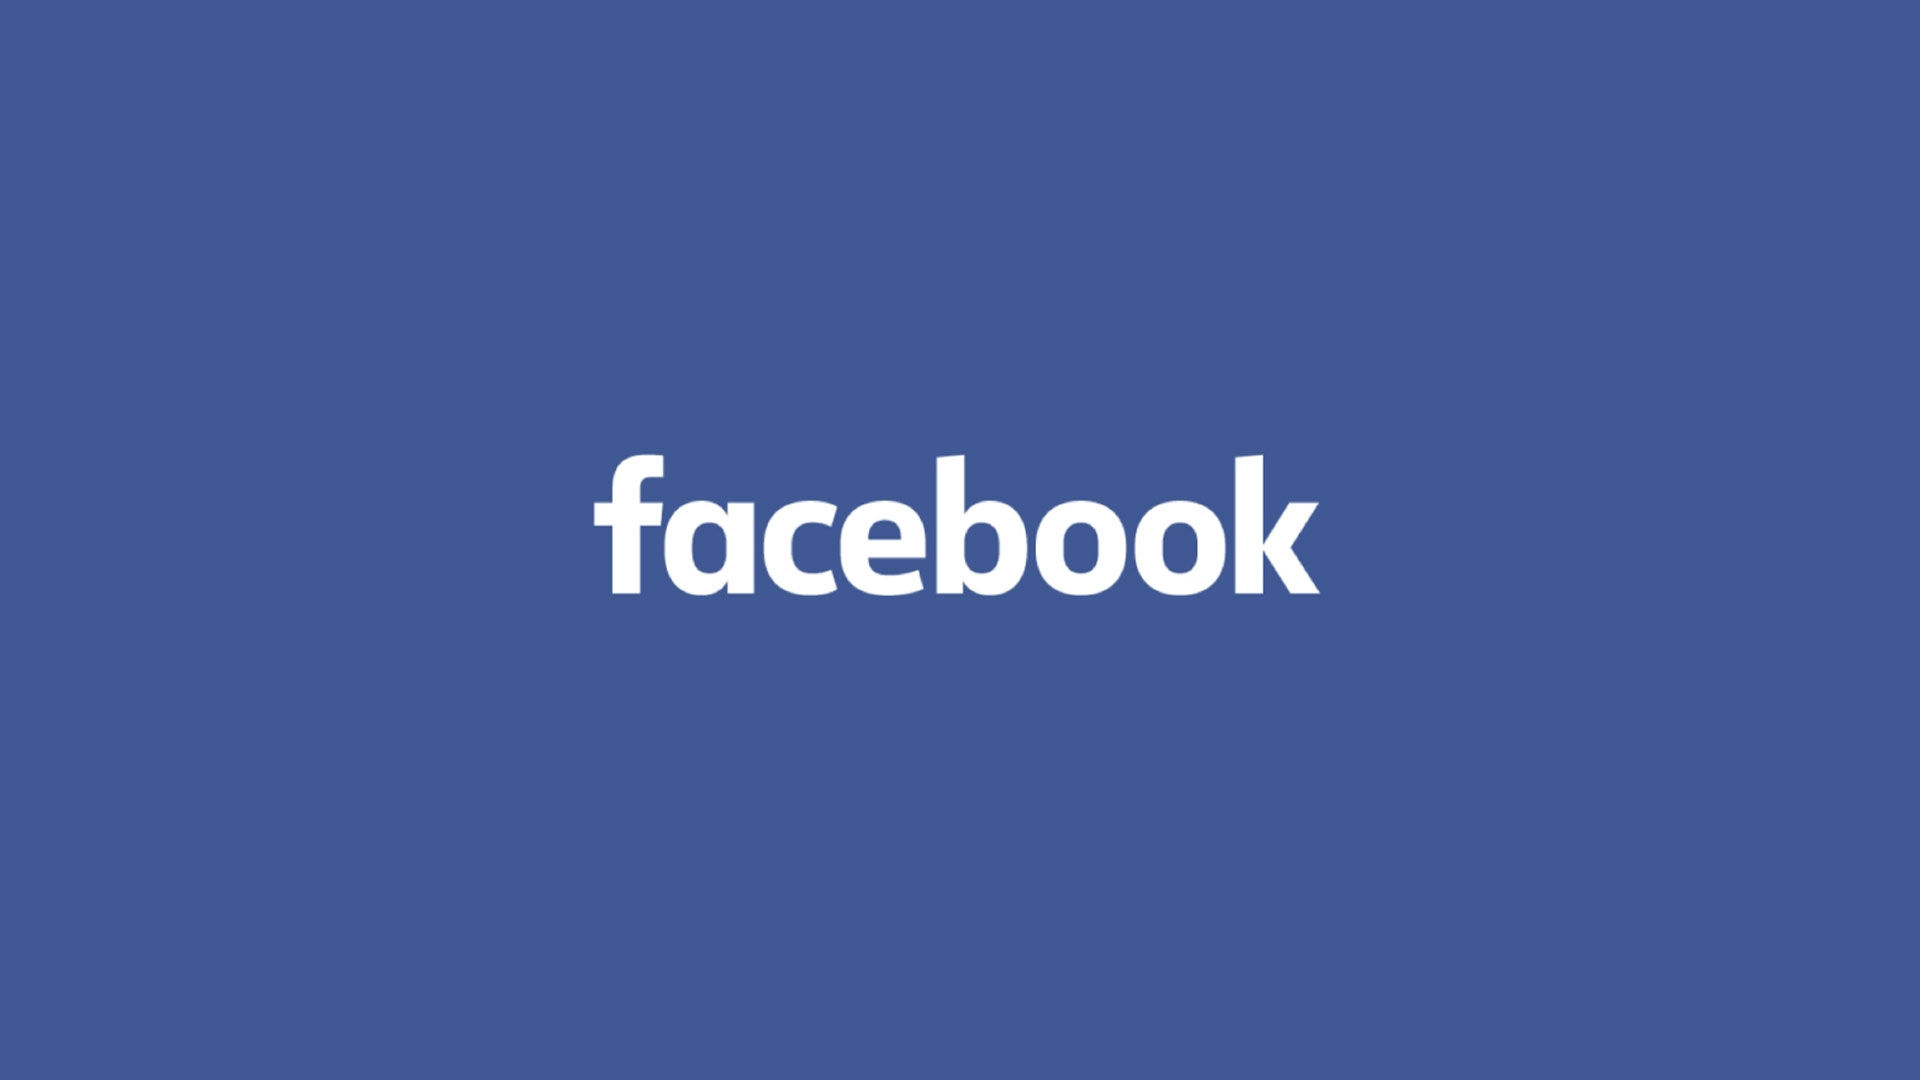 How to See Facebook Timeline in Chronological Order